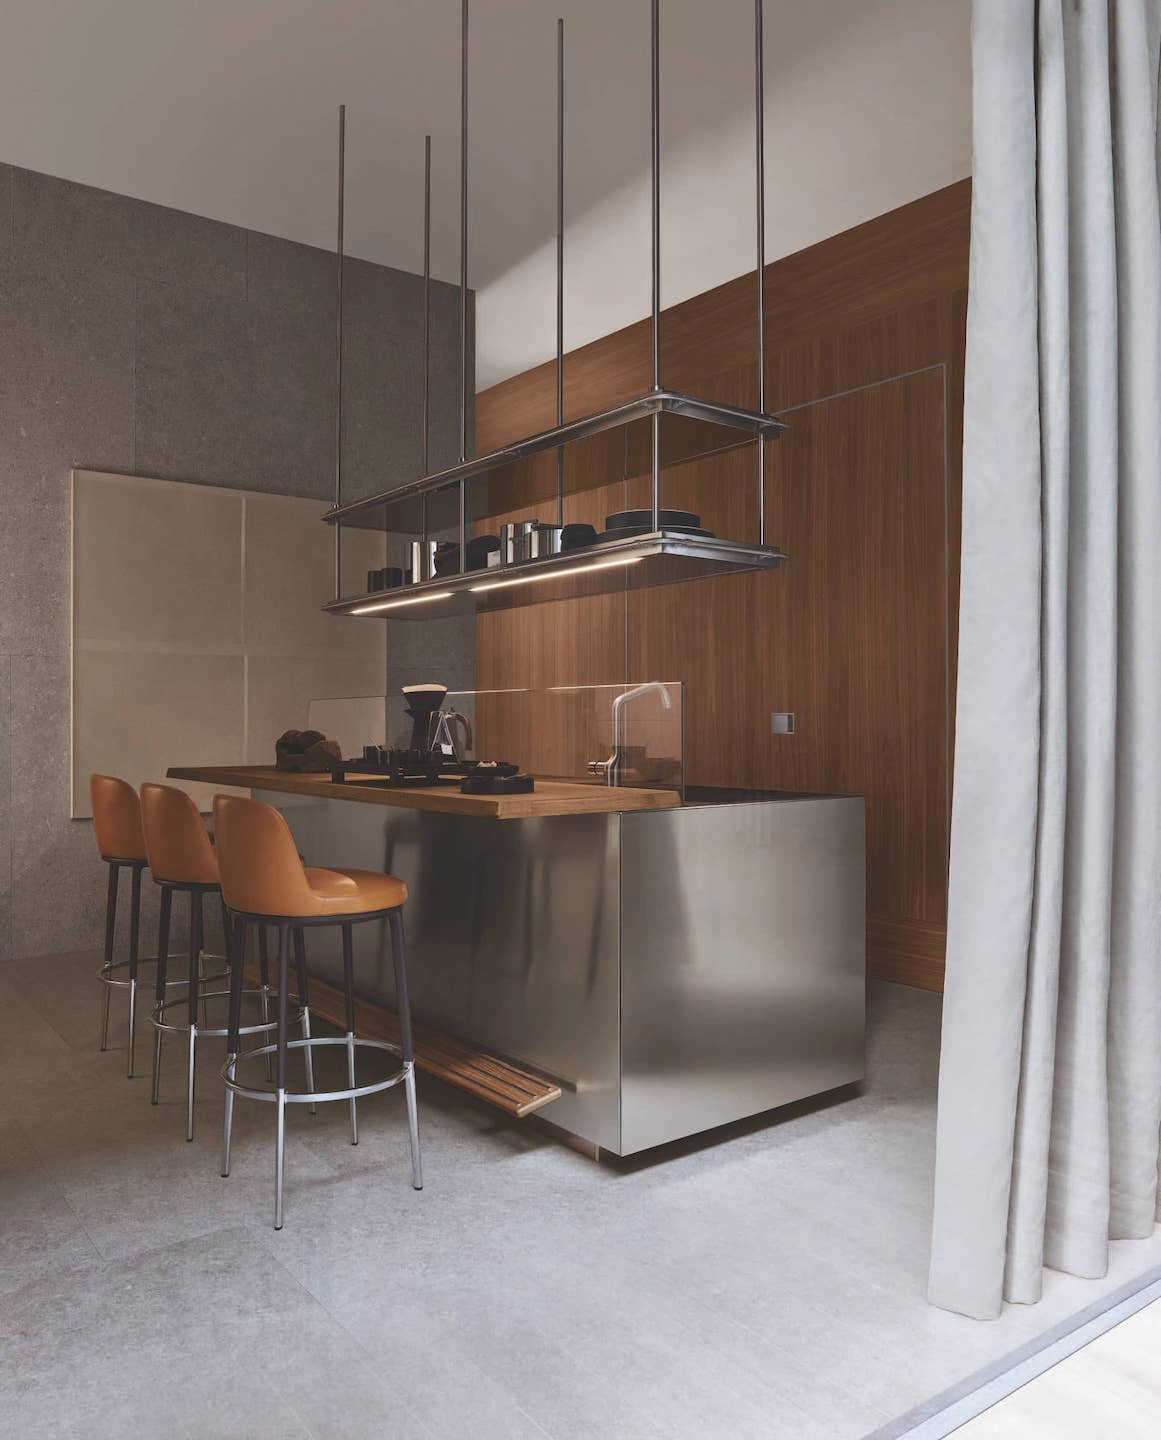 Image of an Arclinea steel kitchen with wooden snacks and tobacco-coloured designer stools